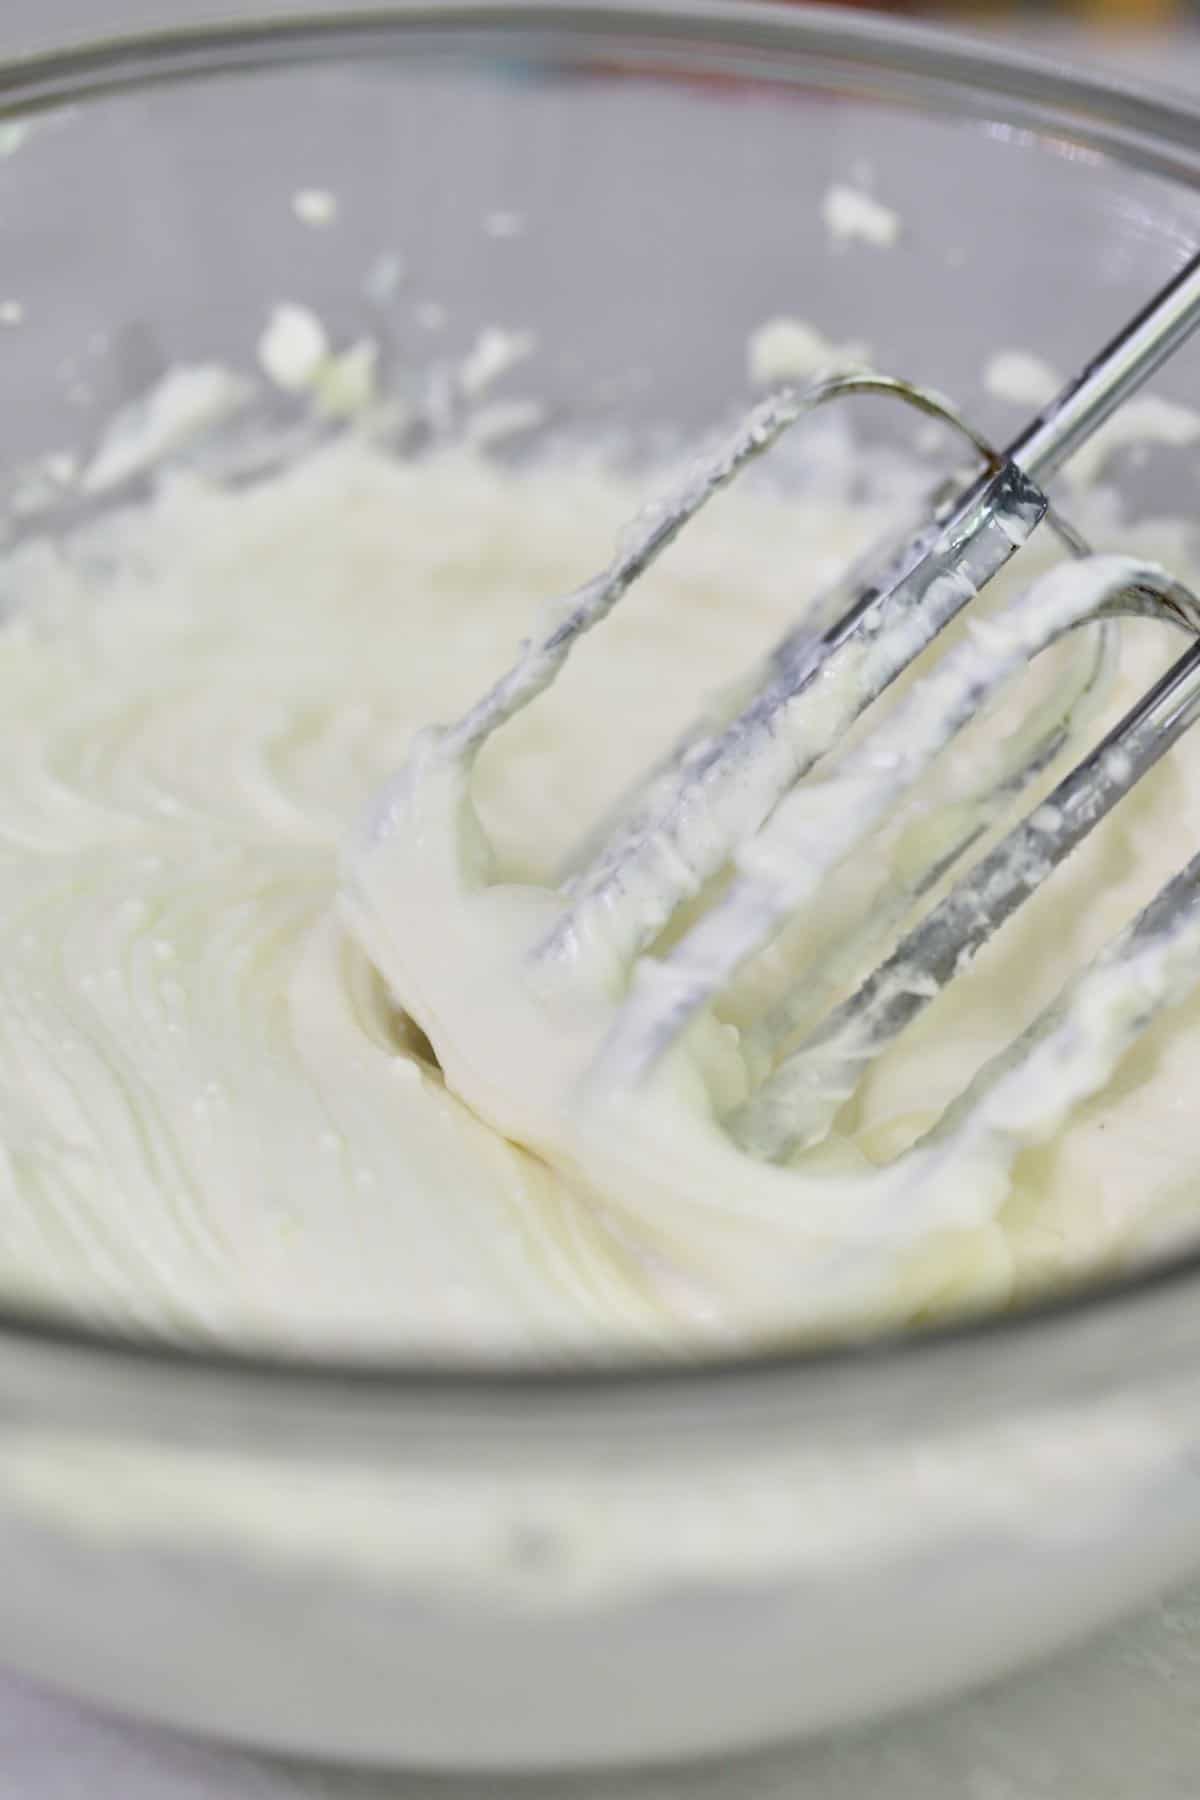 A glass mixing bowl with cream cheese being mixed up.